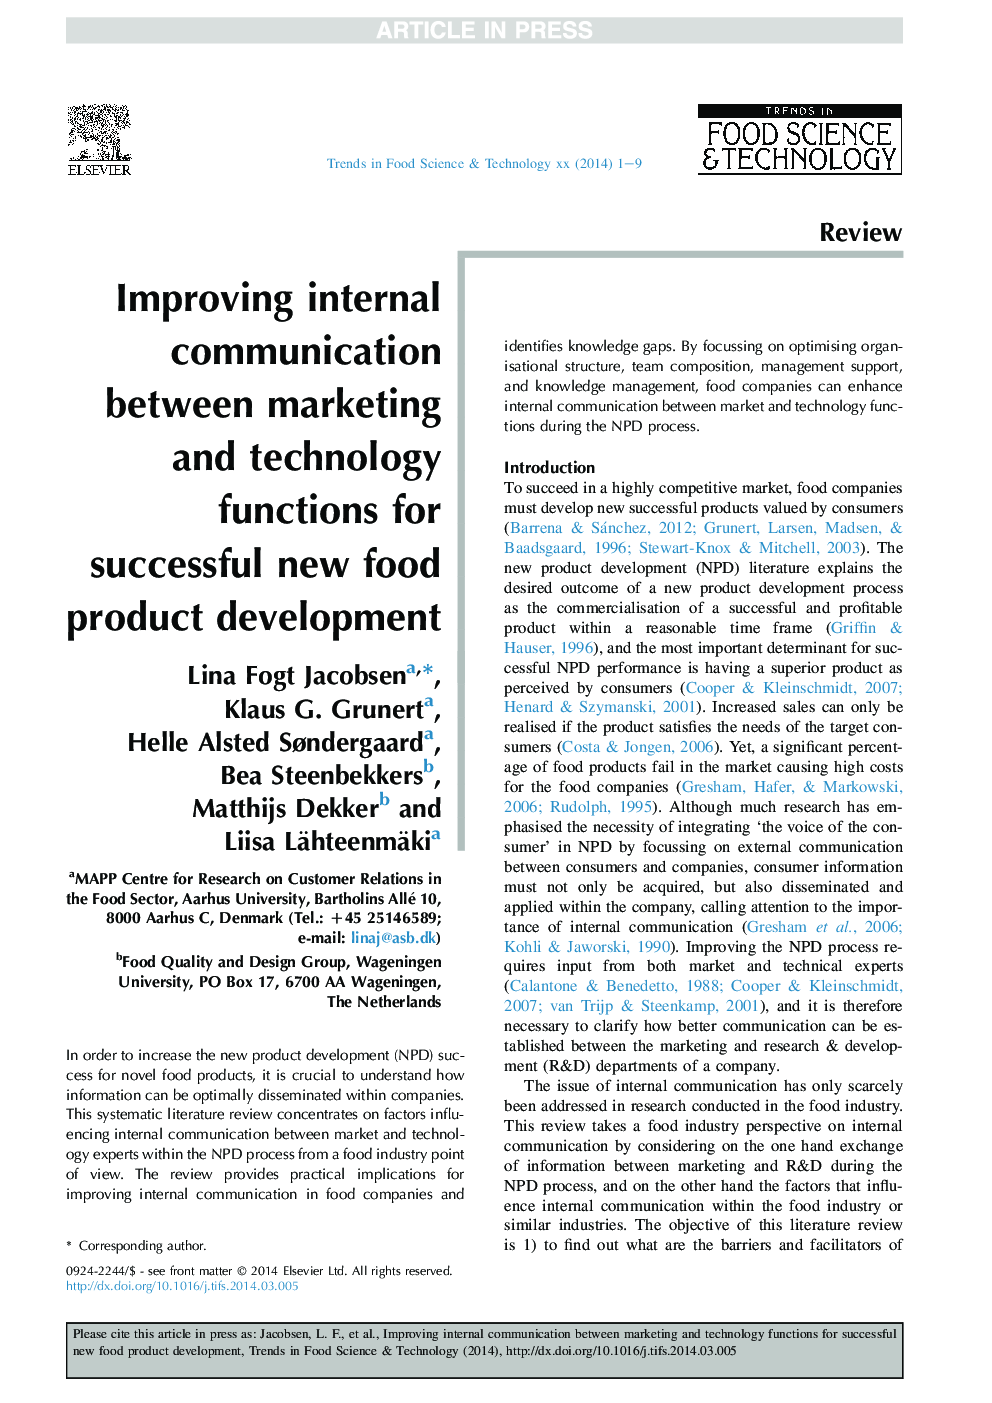 Improving internal communication between marketing and technology functions for successful new food product development